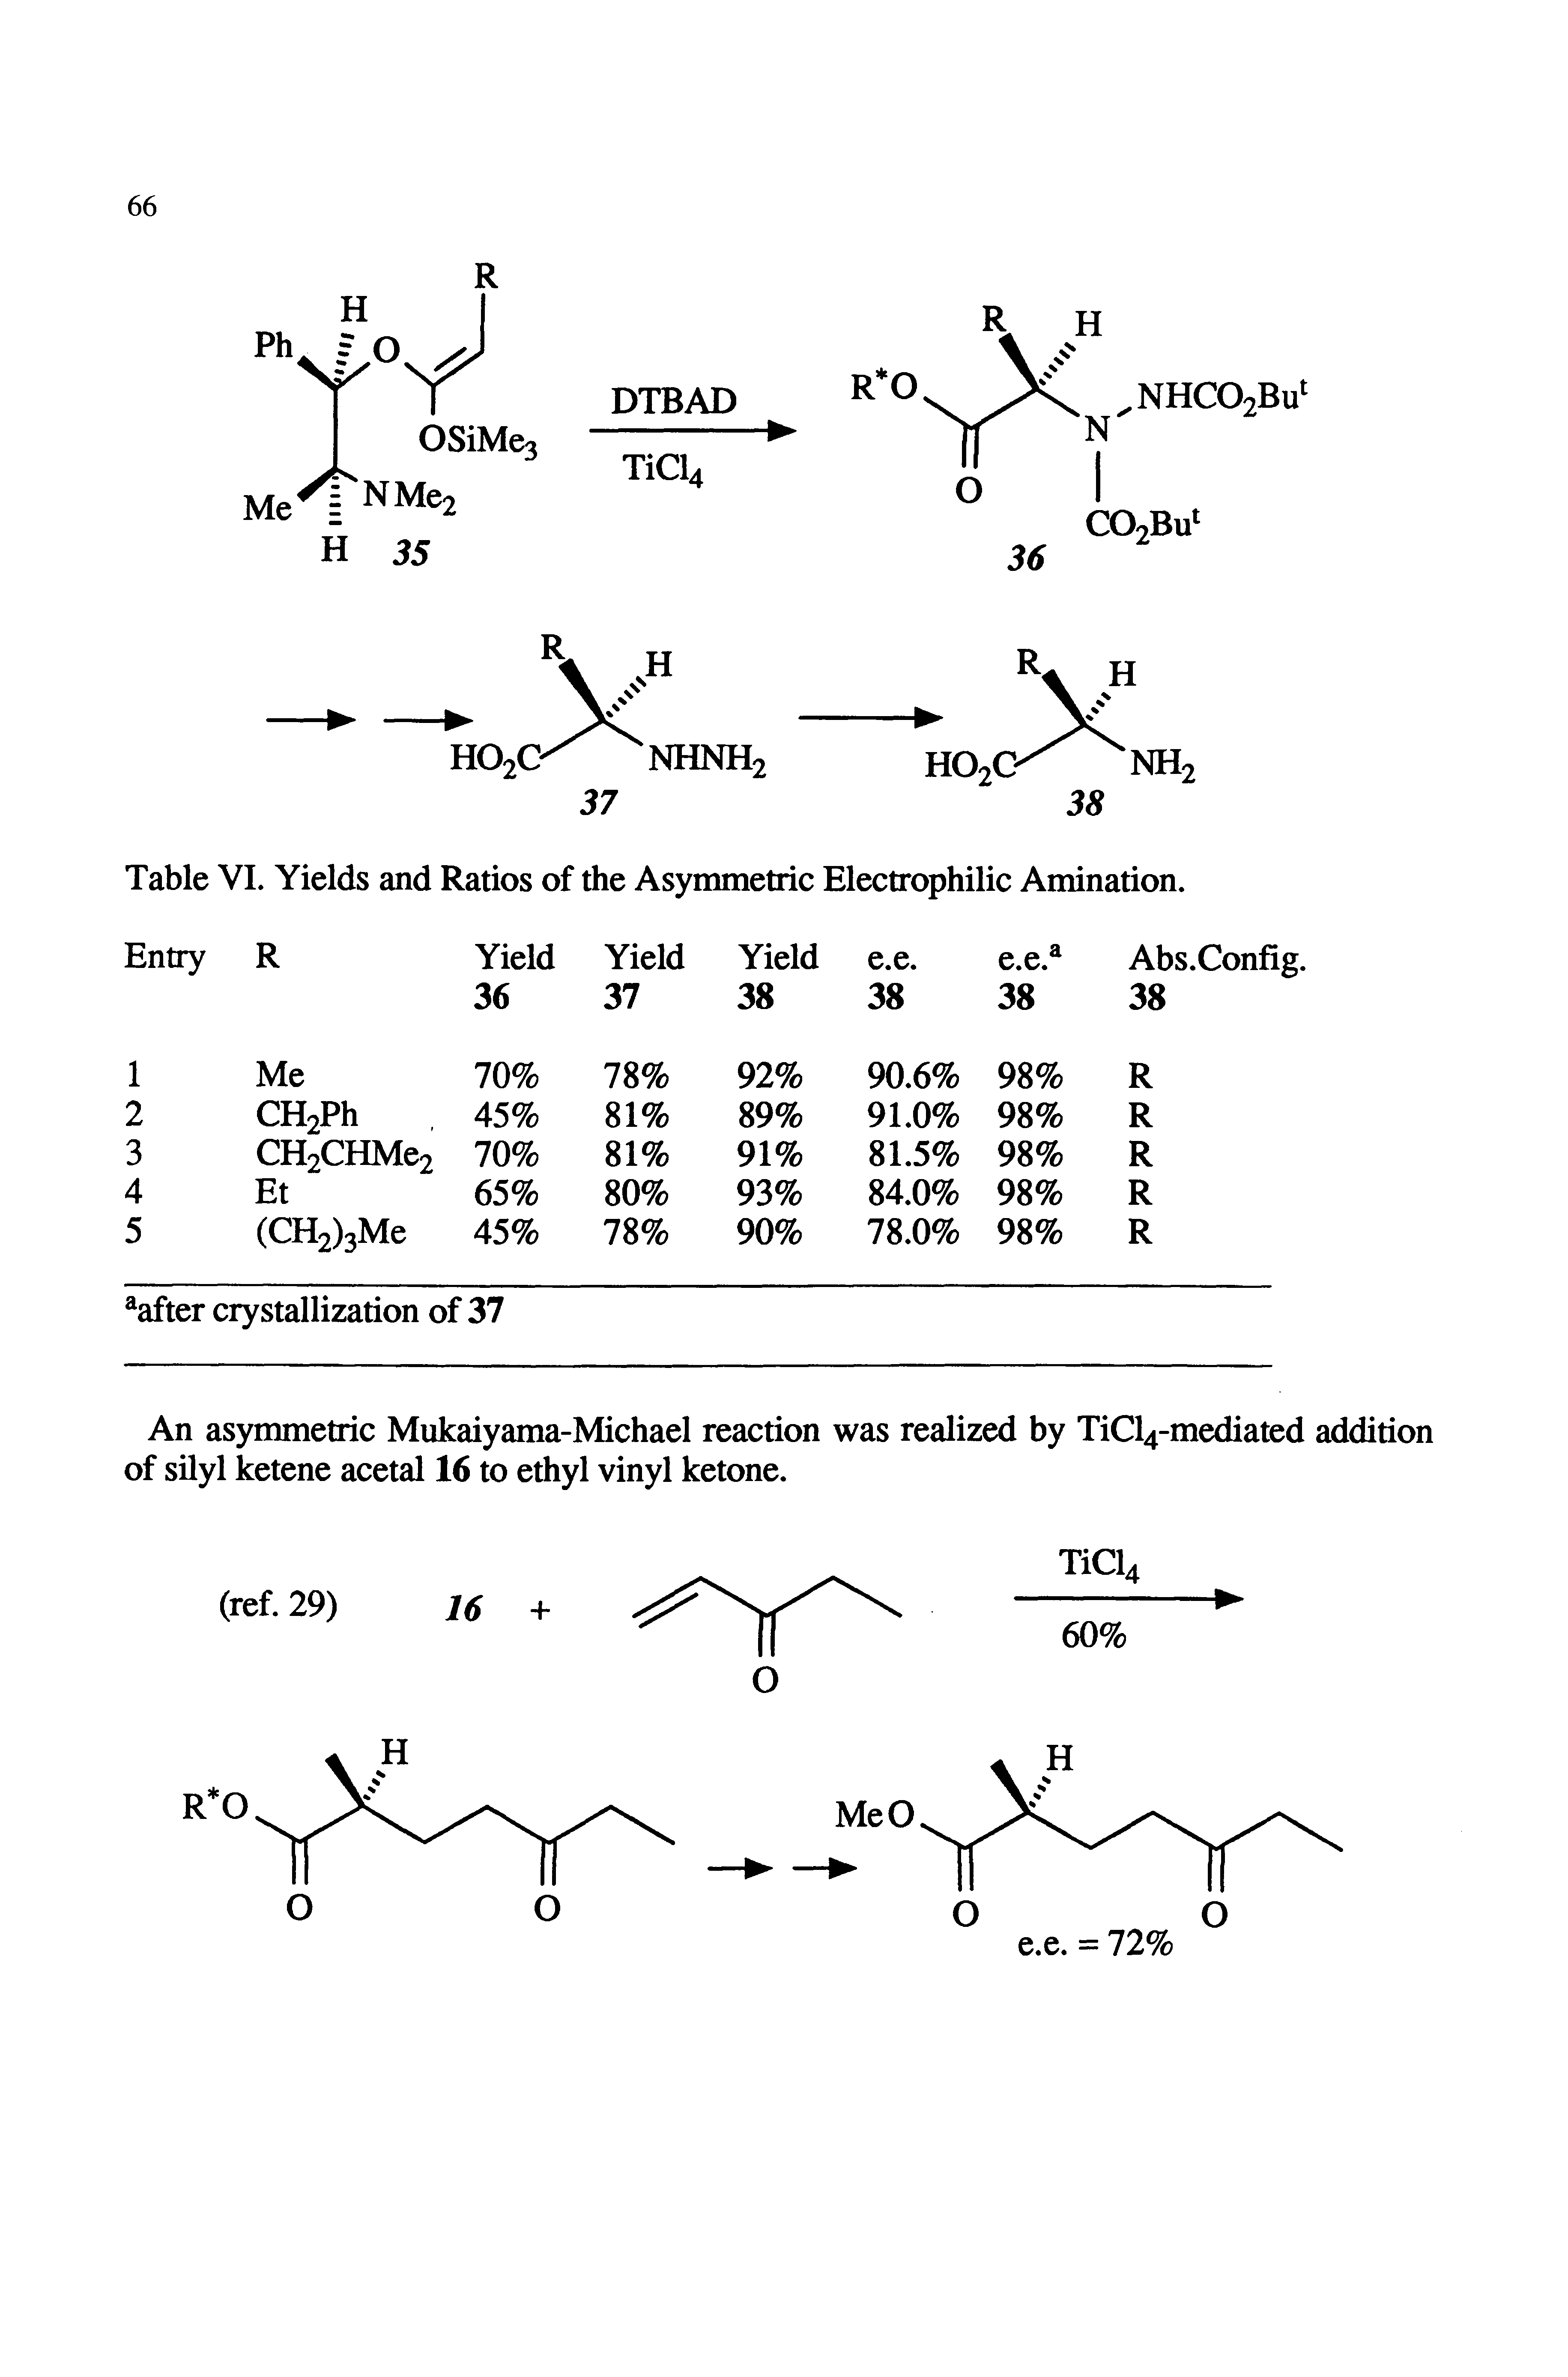 Table VI. Yields and Rados of the Asymmetric Electrophilic Amination.